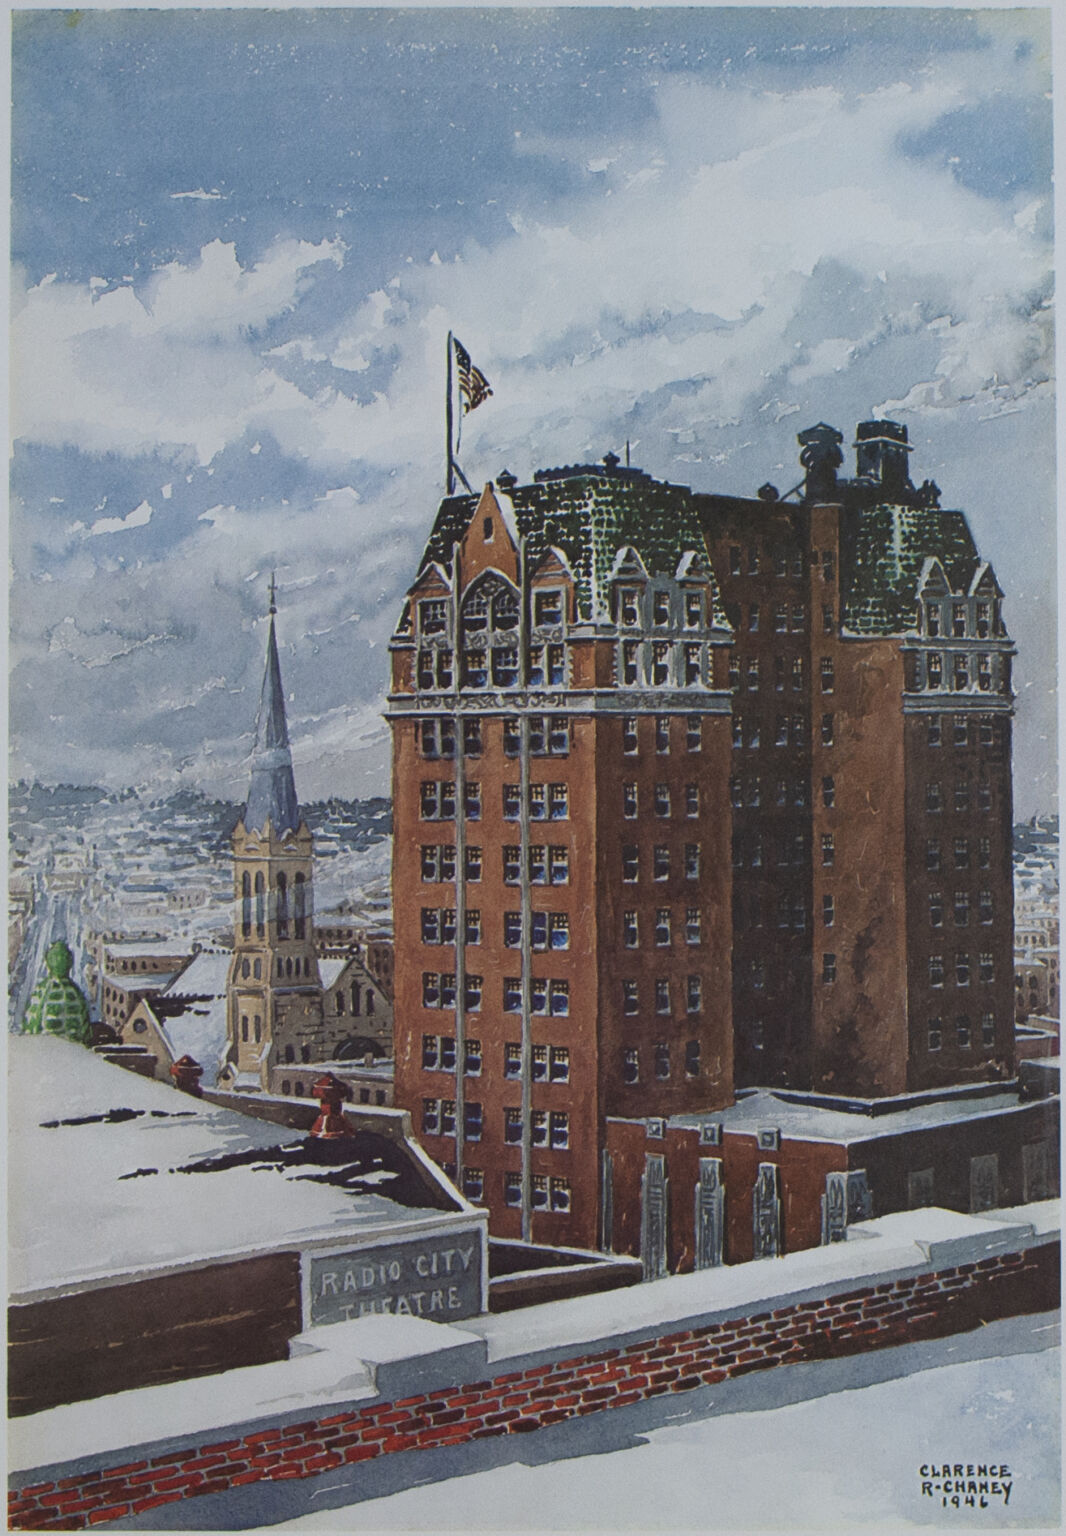 Print of watercolor rendition of Minneapolis YMCA and Trinity Church from the Radio City Theater roof.